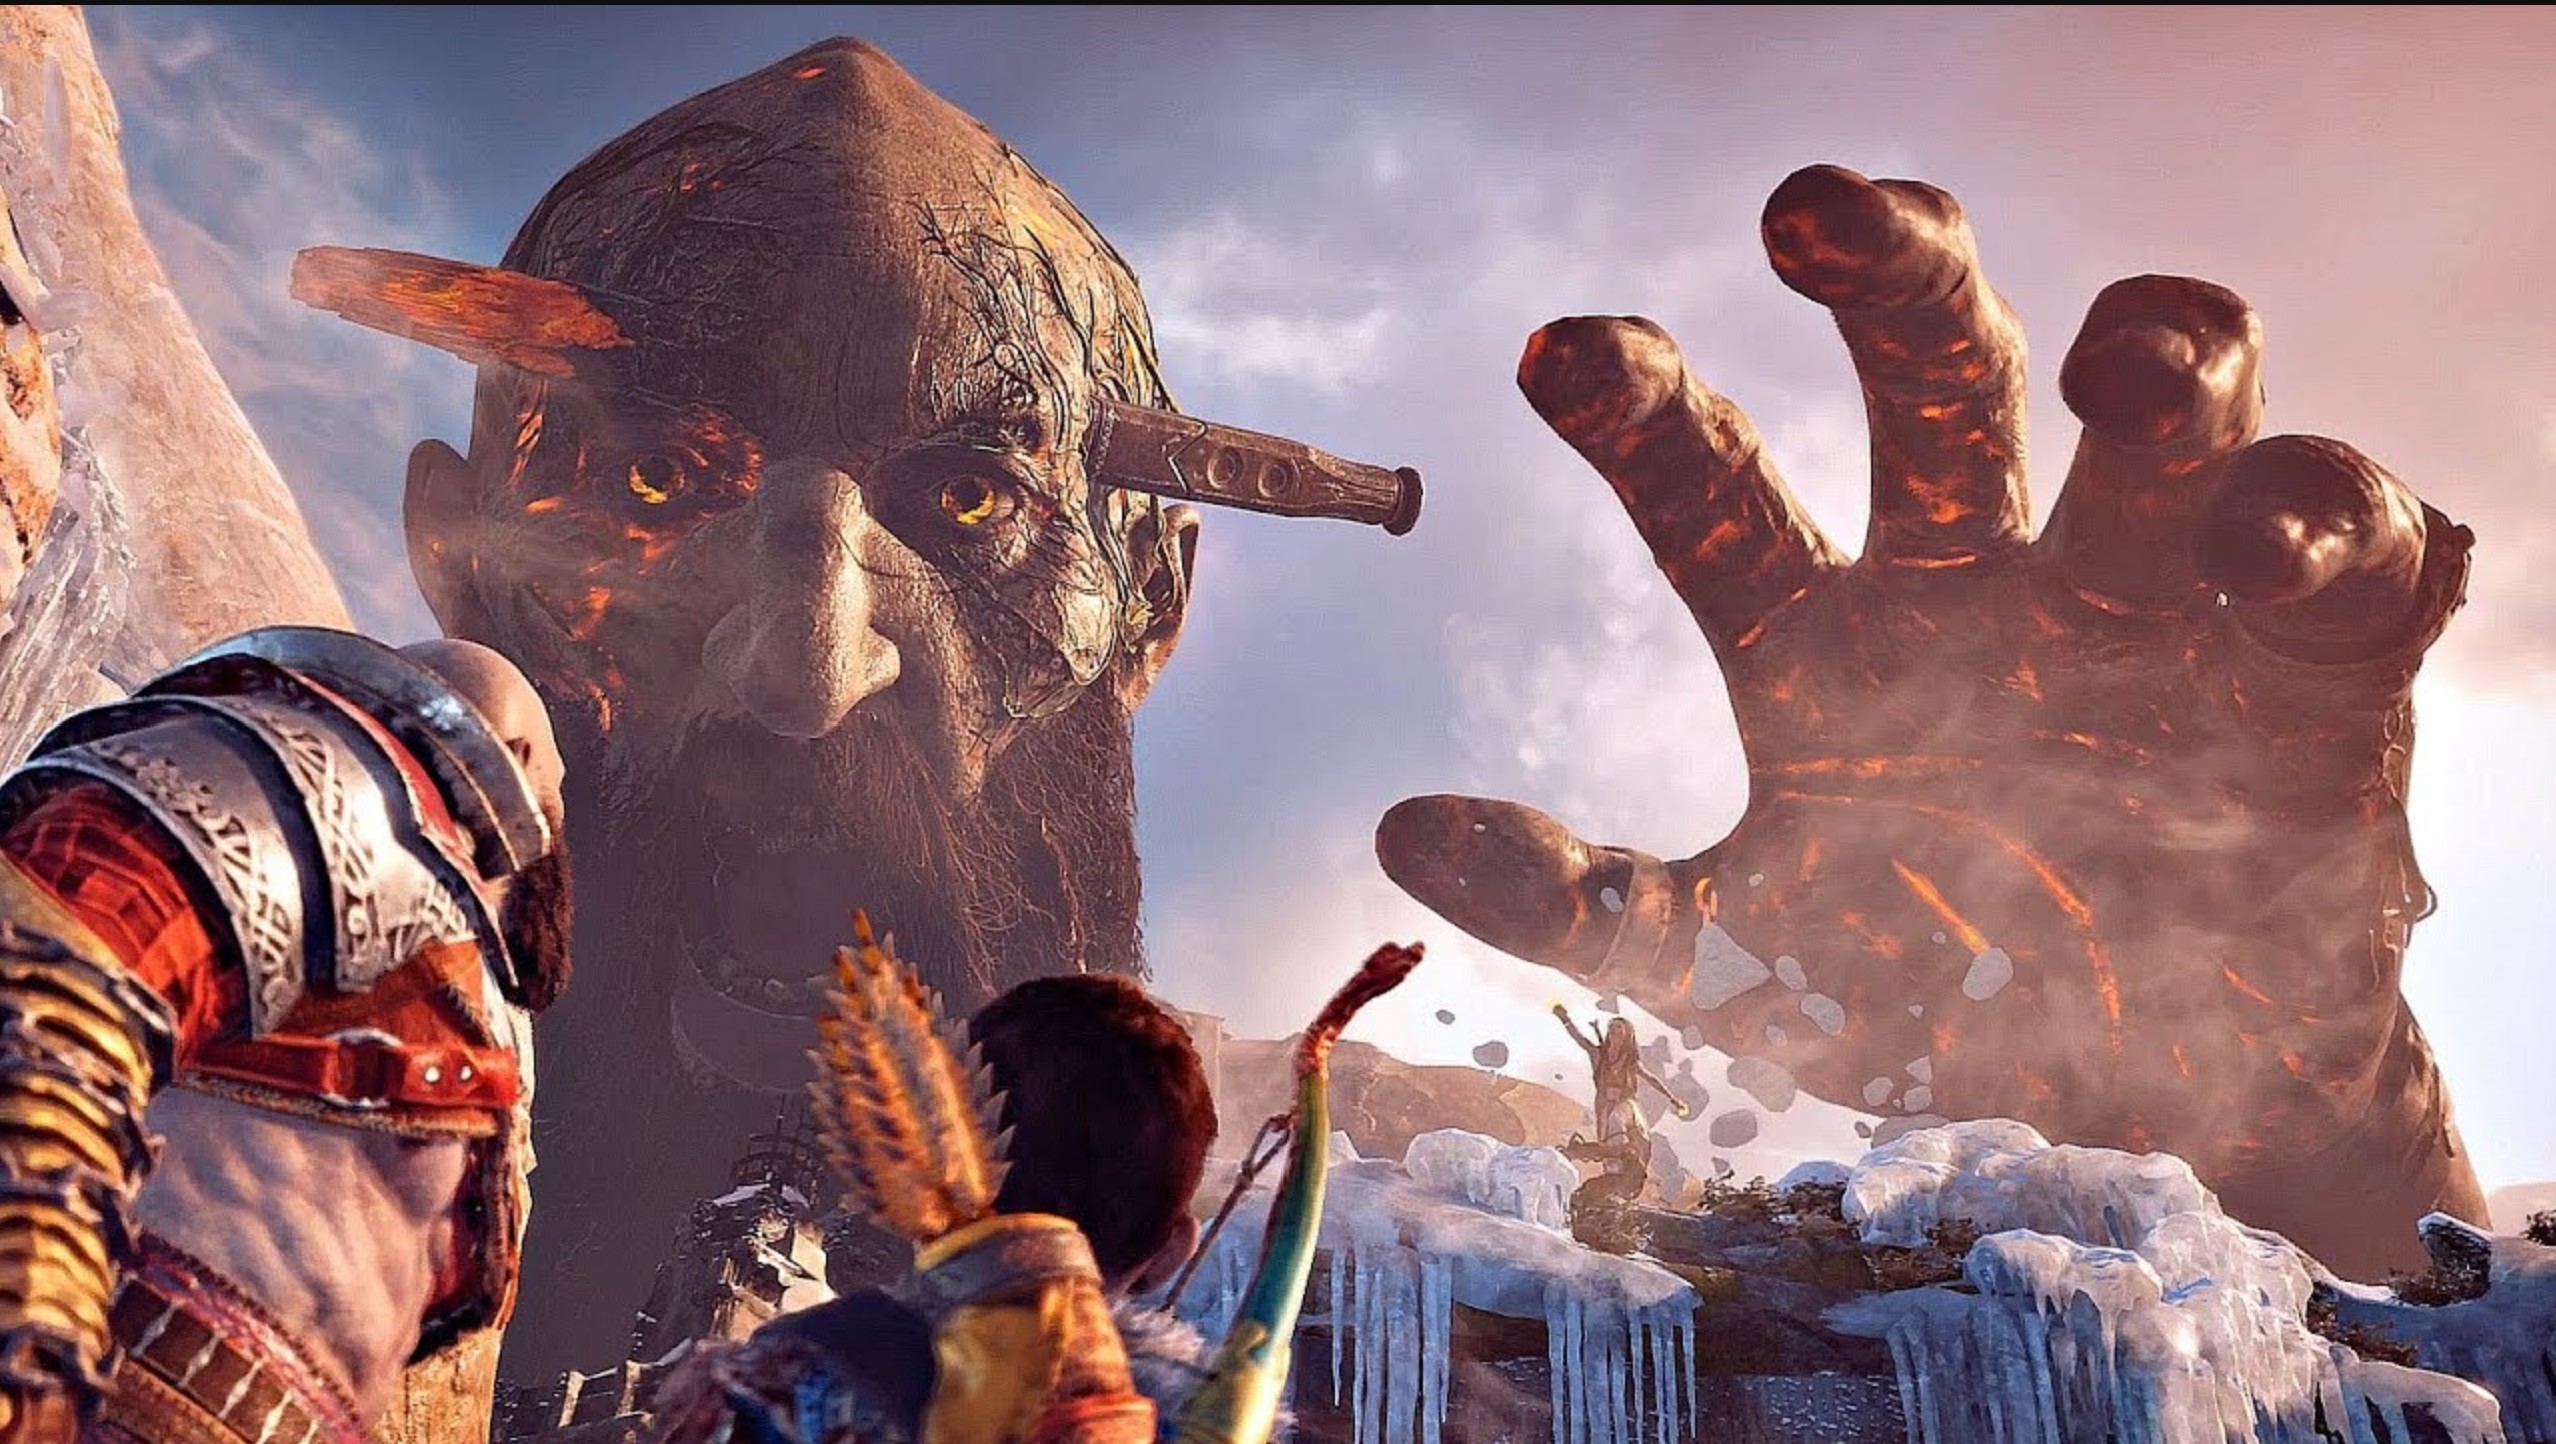 Fighting a God: Behind the Scenes of God of War's First Boss